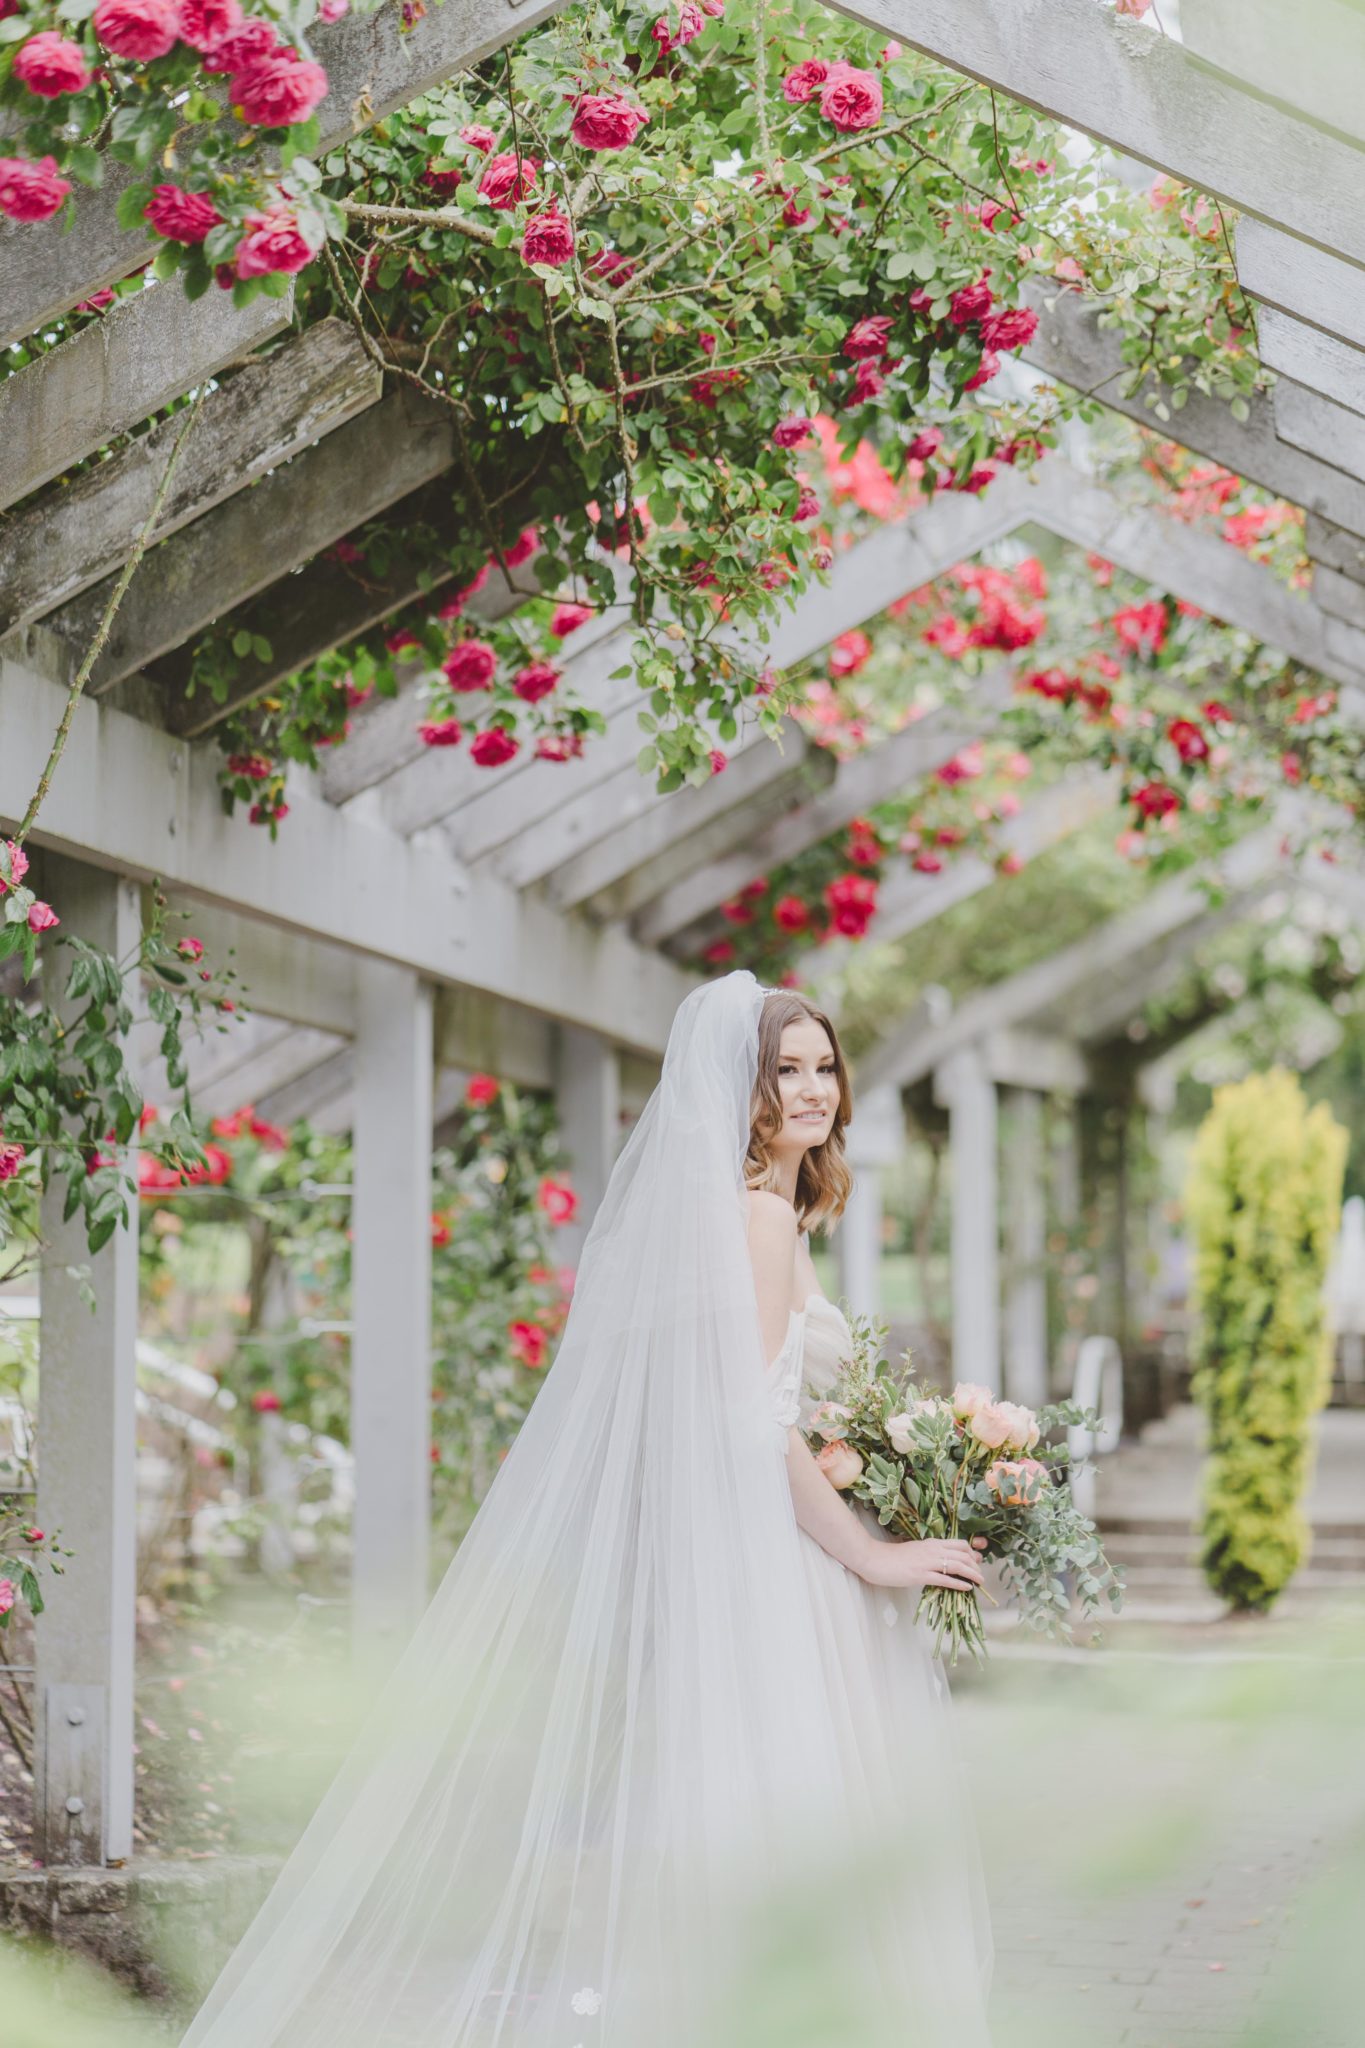 Enchanted Rose Garden Portraits in this Stanley Park Elopement Inspired by Taylor Swift Featured by Brontë Bride